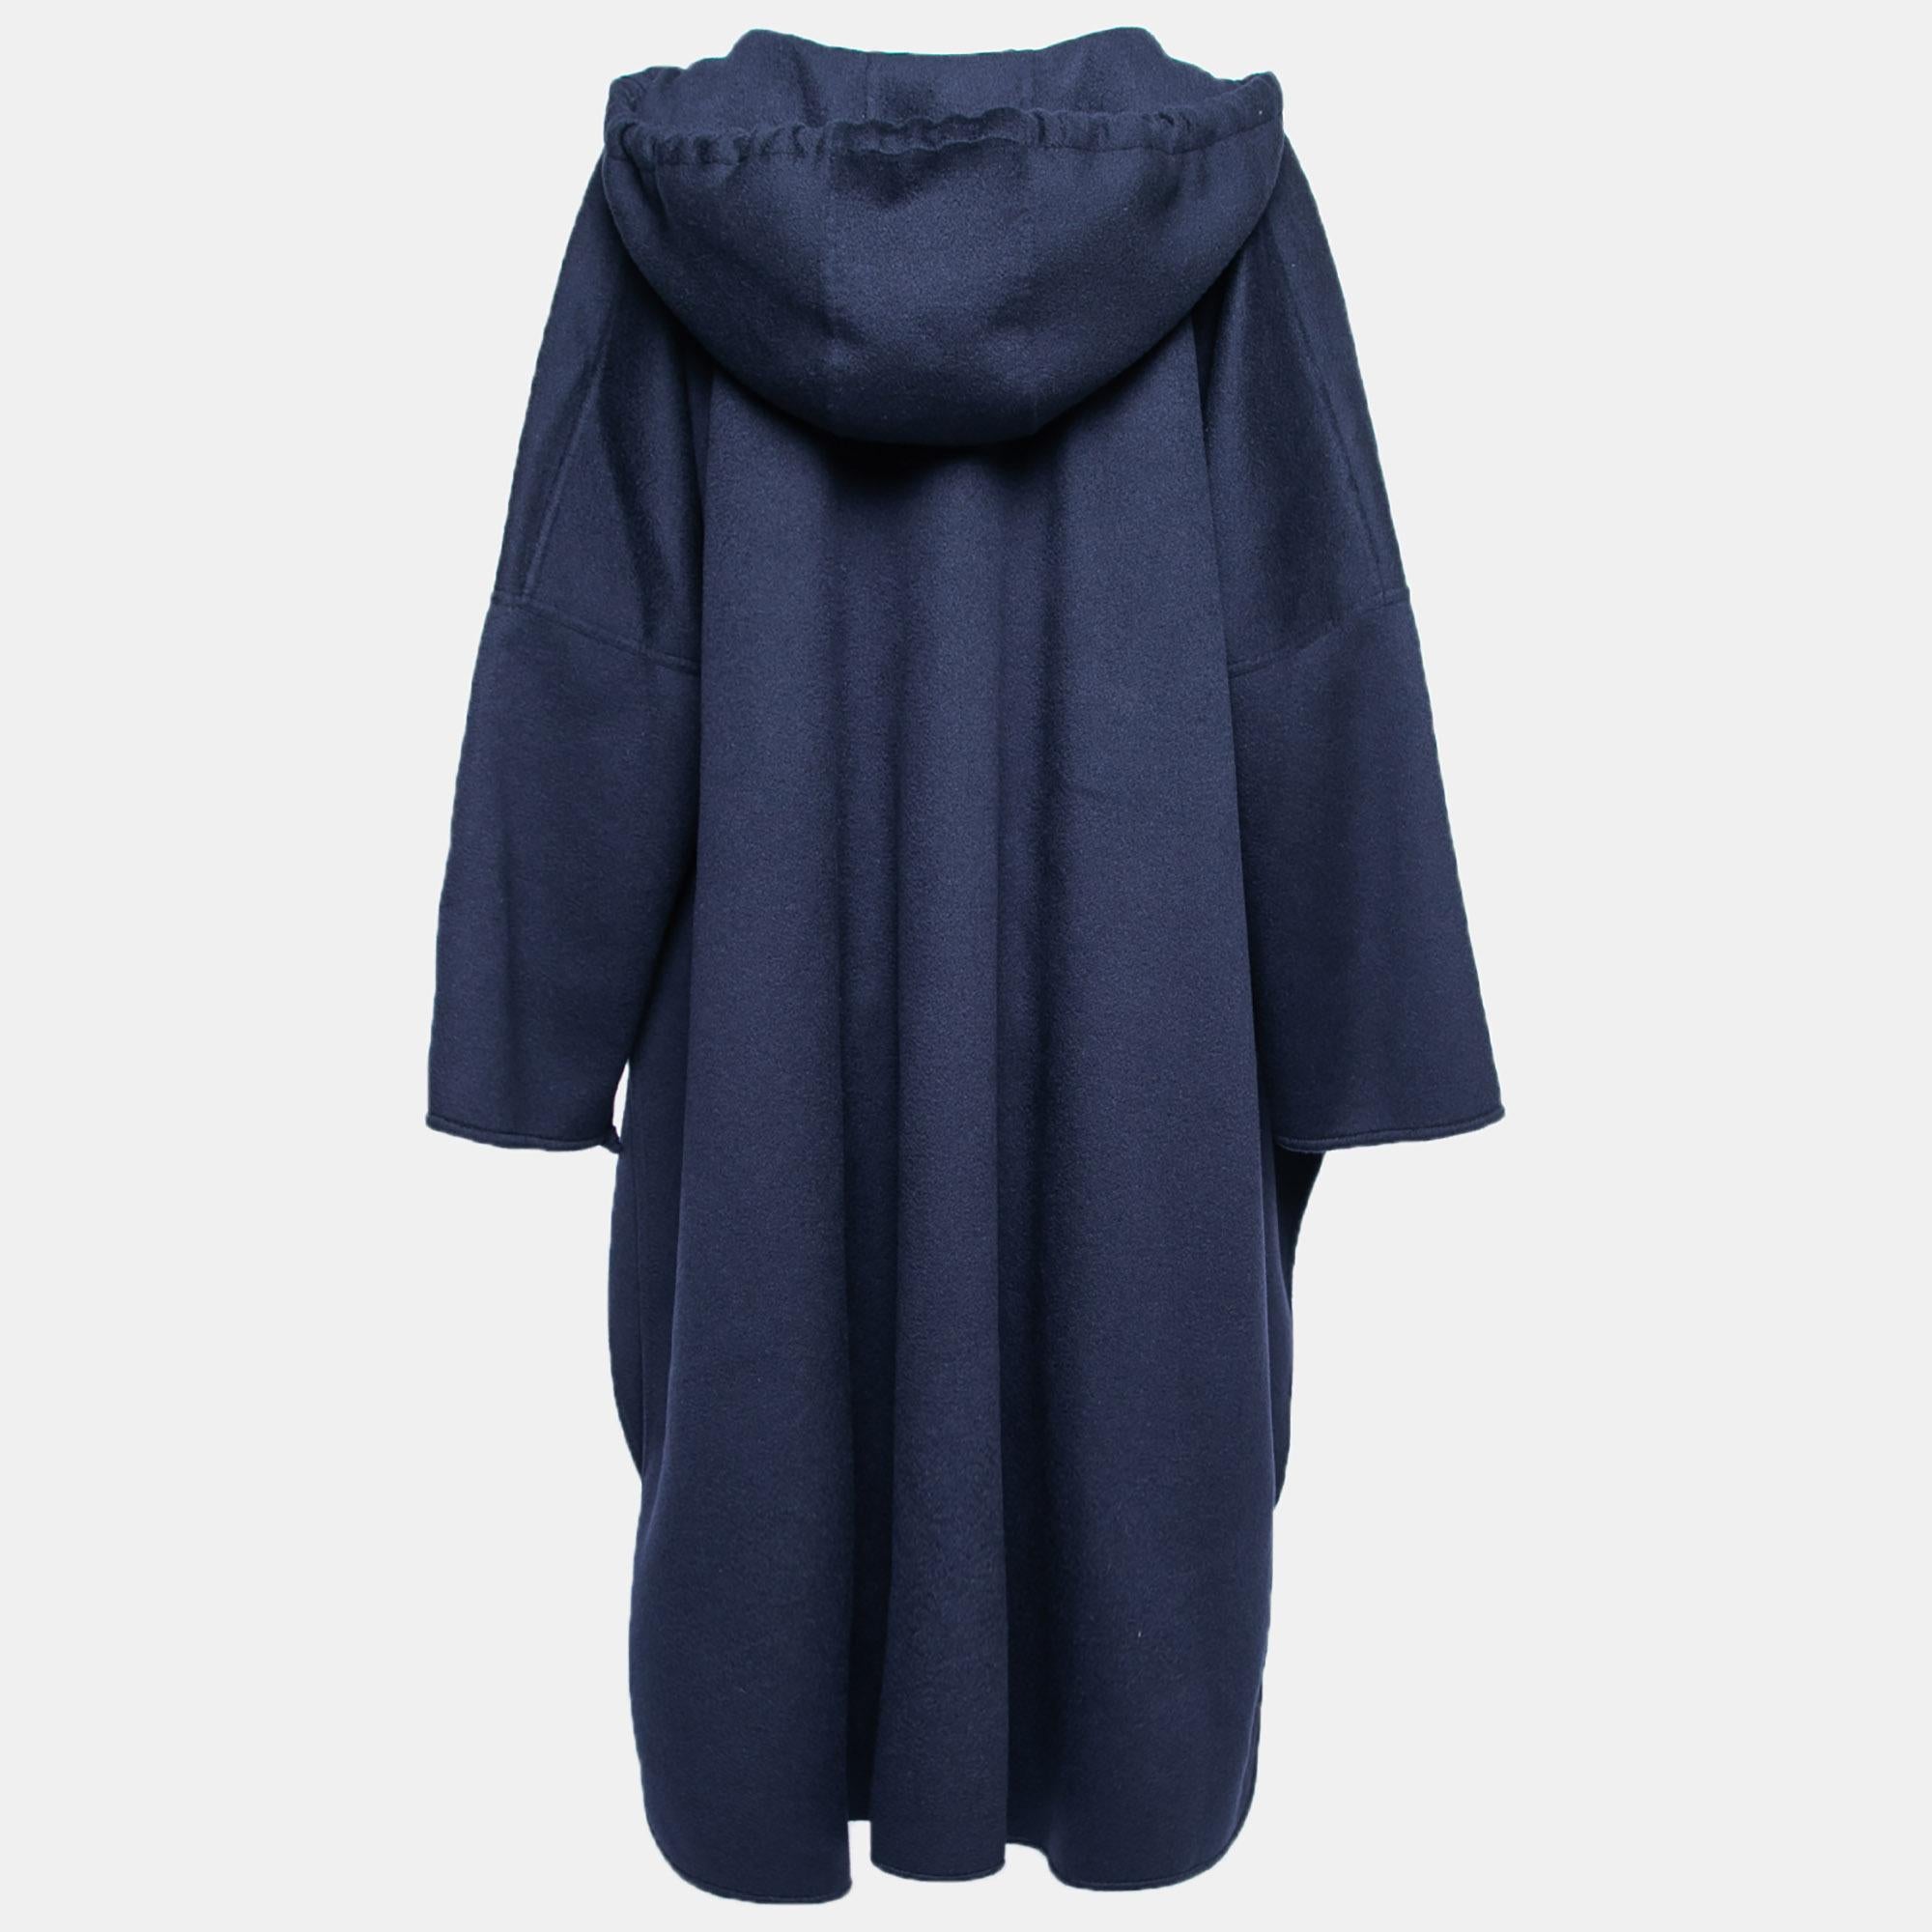 When winter arrives, it is necessary to pick the right fabrics to stay warm, and with this classy creation from Max Mara, consider it done! This cape is truly the right investment to make for the winter. Tailored using midnight-blue cashmere fabric,